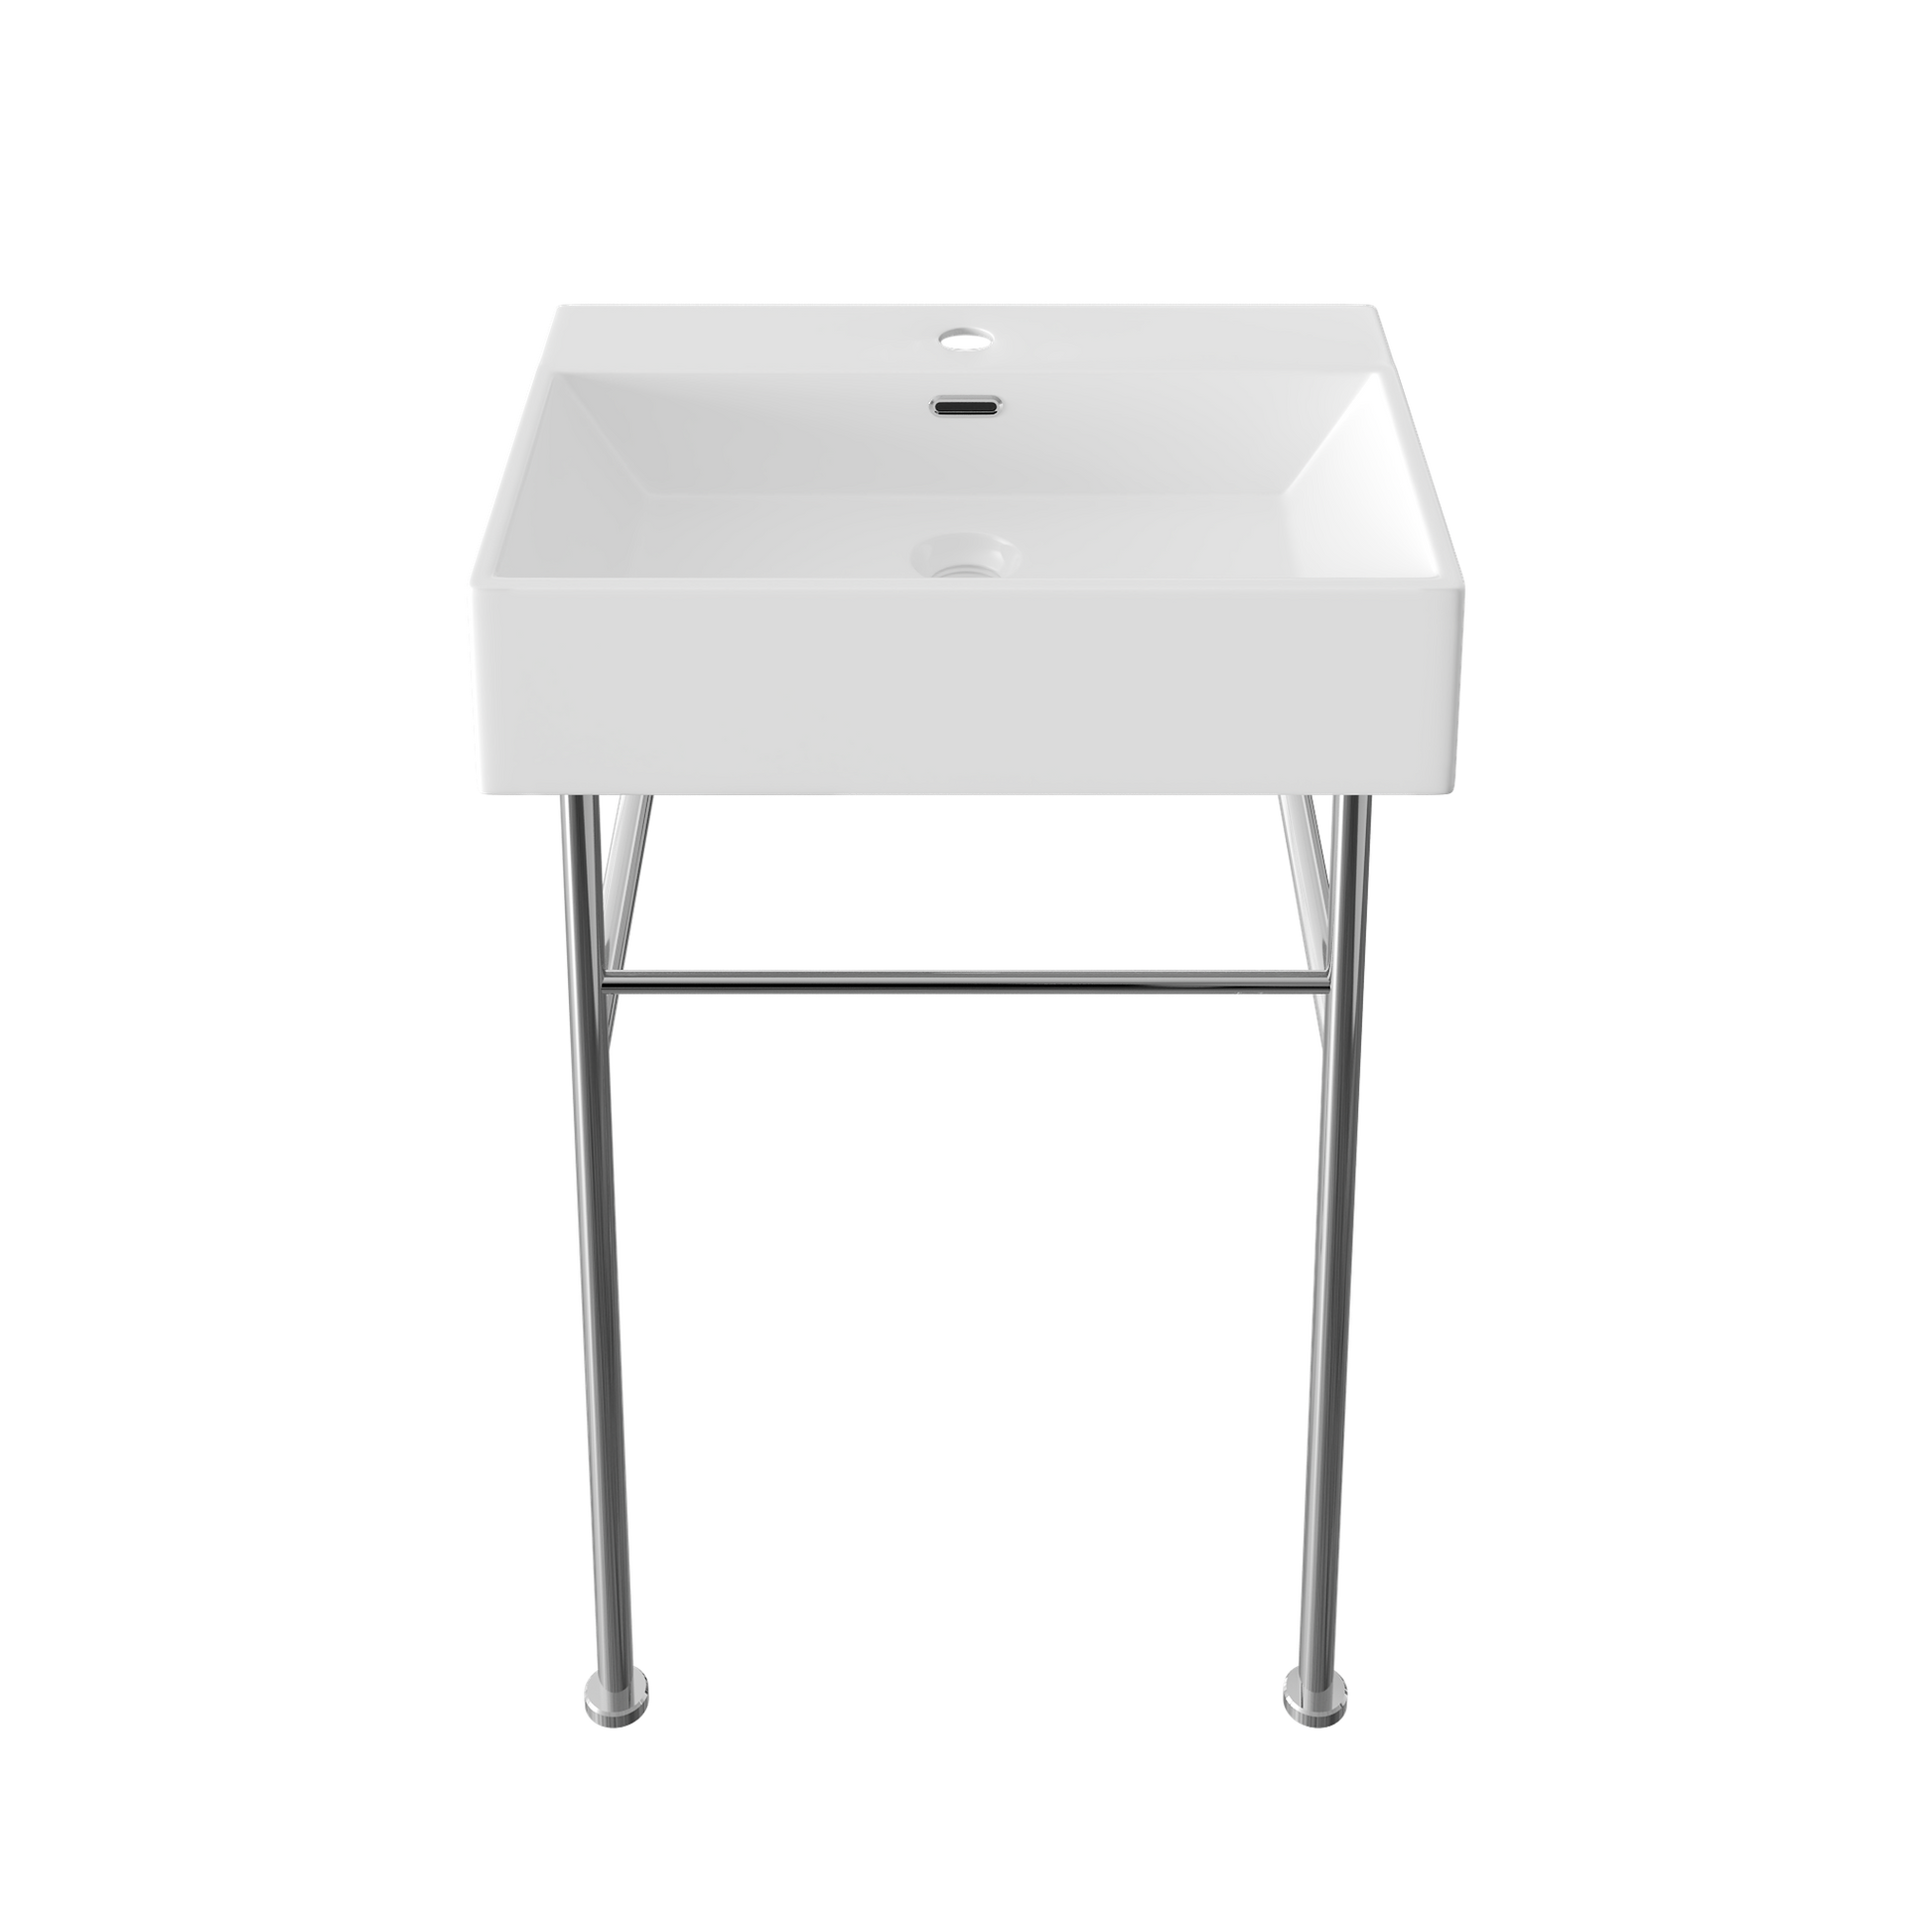 DeerValley 24" Rectangular White Ceramic Console Bathroom Sink With Silver Legs and Single Faucet Hole